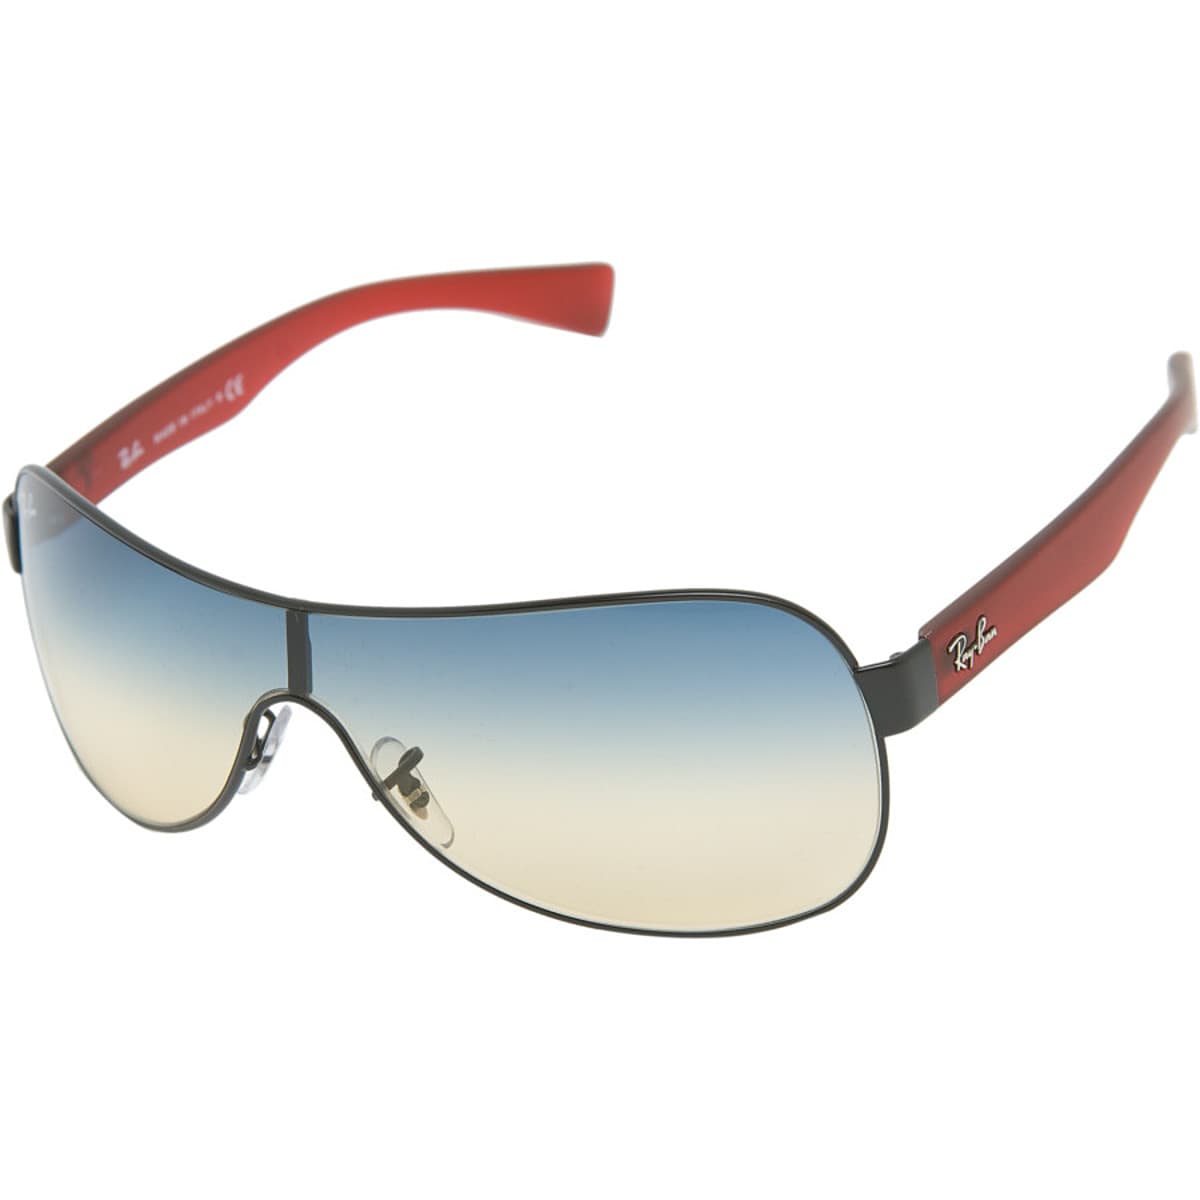 Ray-Ban RB3471 Sunglasses - Women's - Accessories